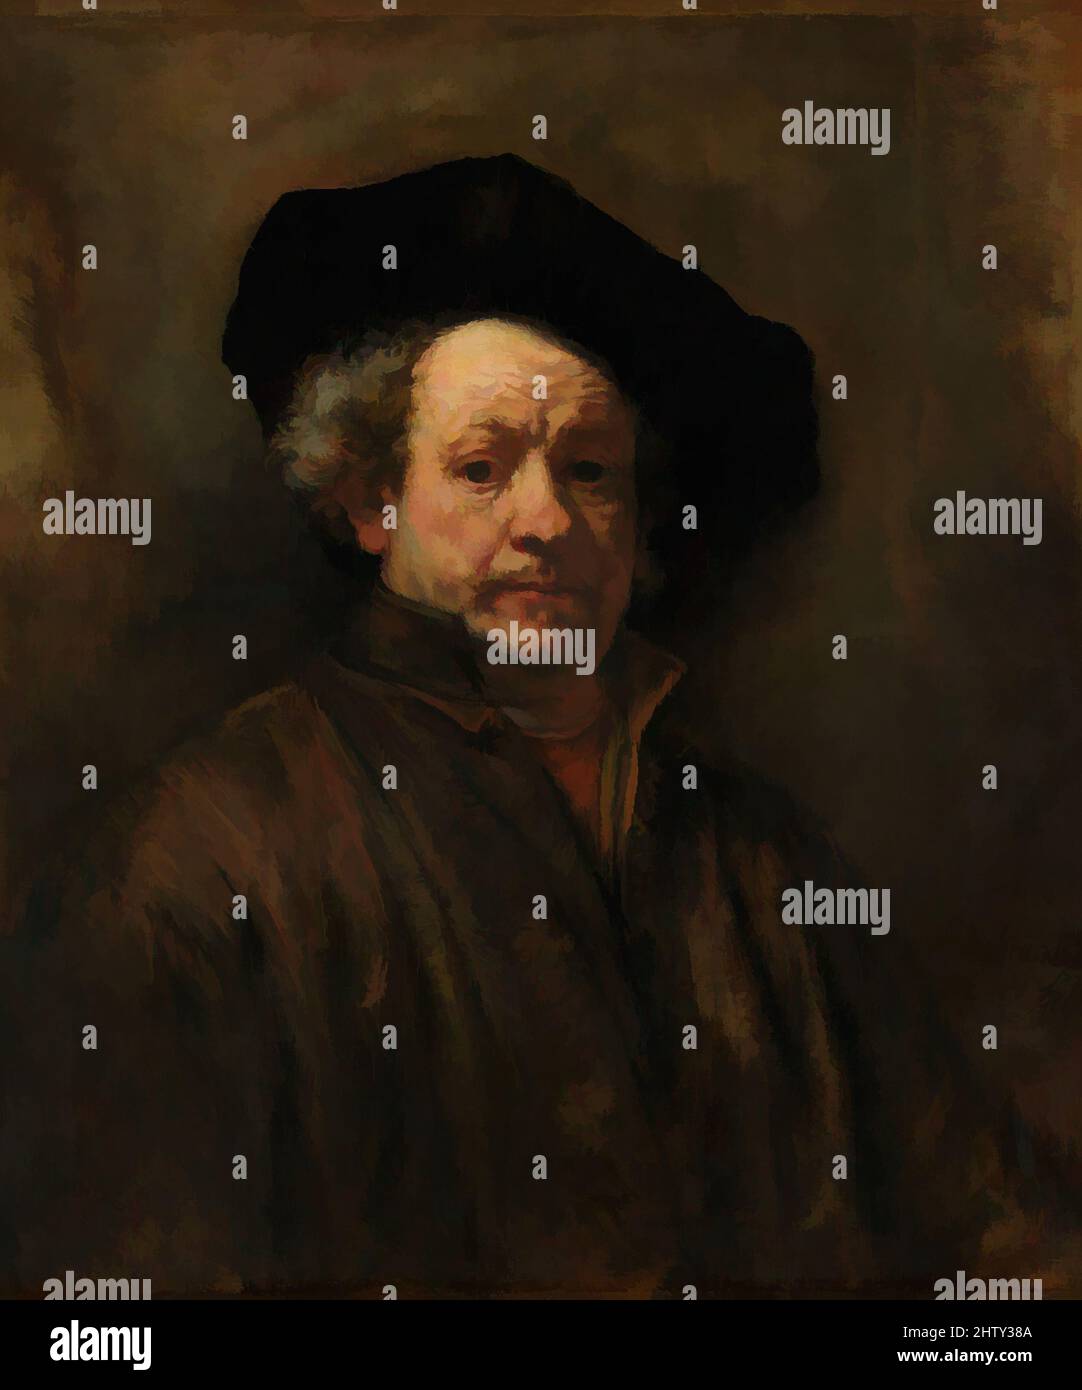 Art inspired by Self-Portrait, 1660, Oil on canvas, 31 5/8 x 26 1/2 in. (80.3 x 67.3 cm), Paintings, Rembrandt (Rembrandt van Rijn) (Dutch, Leiden 1606–1669 Amsterdam), The dozen or more self-portraits that date from each decade of Rembrandt's career vary considerably in composition, Classic works modernized by Artotop with a splash of modernity. Shapes, color and value, eye-catching visual impact on art. Emotions through freedom of artworks in a contemporary way. A timeless message pursuing a wildly creative new direction. Artists turning to the digital medium and creating the Artotop NFT Stock Photo